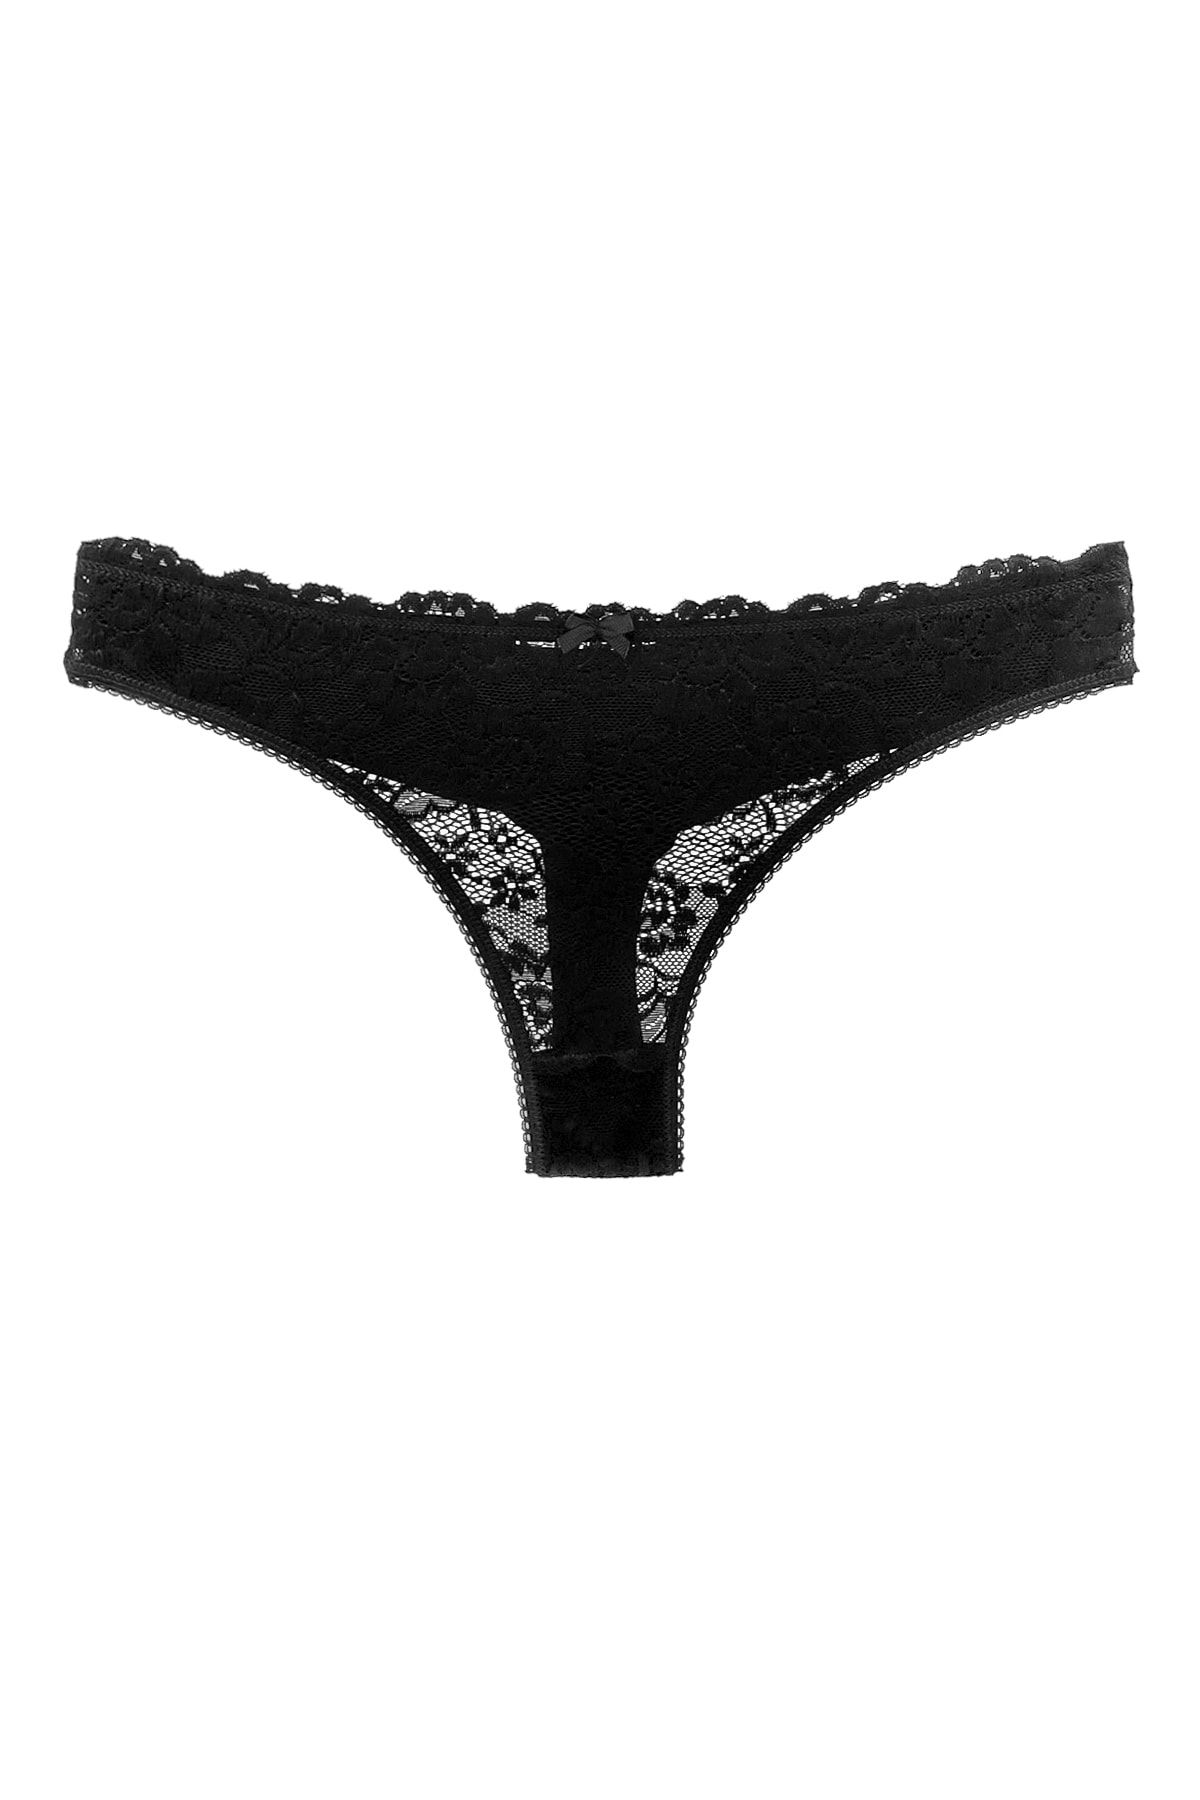 HNX Black Lace Front and Back Double Layer Cotton Thong Women's Panties -  Trendyol